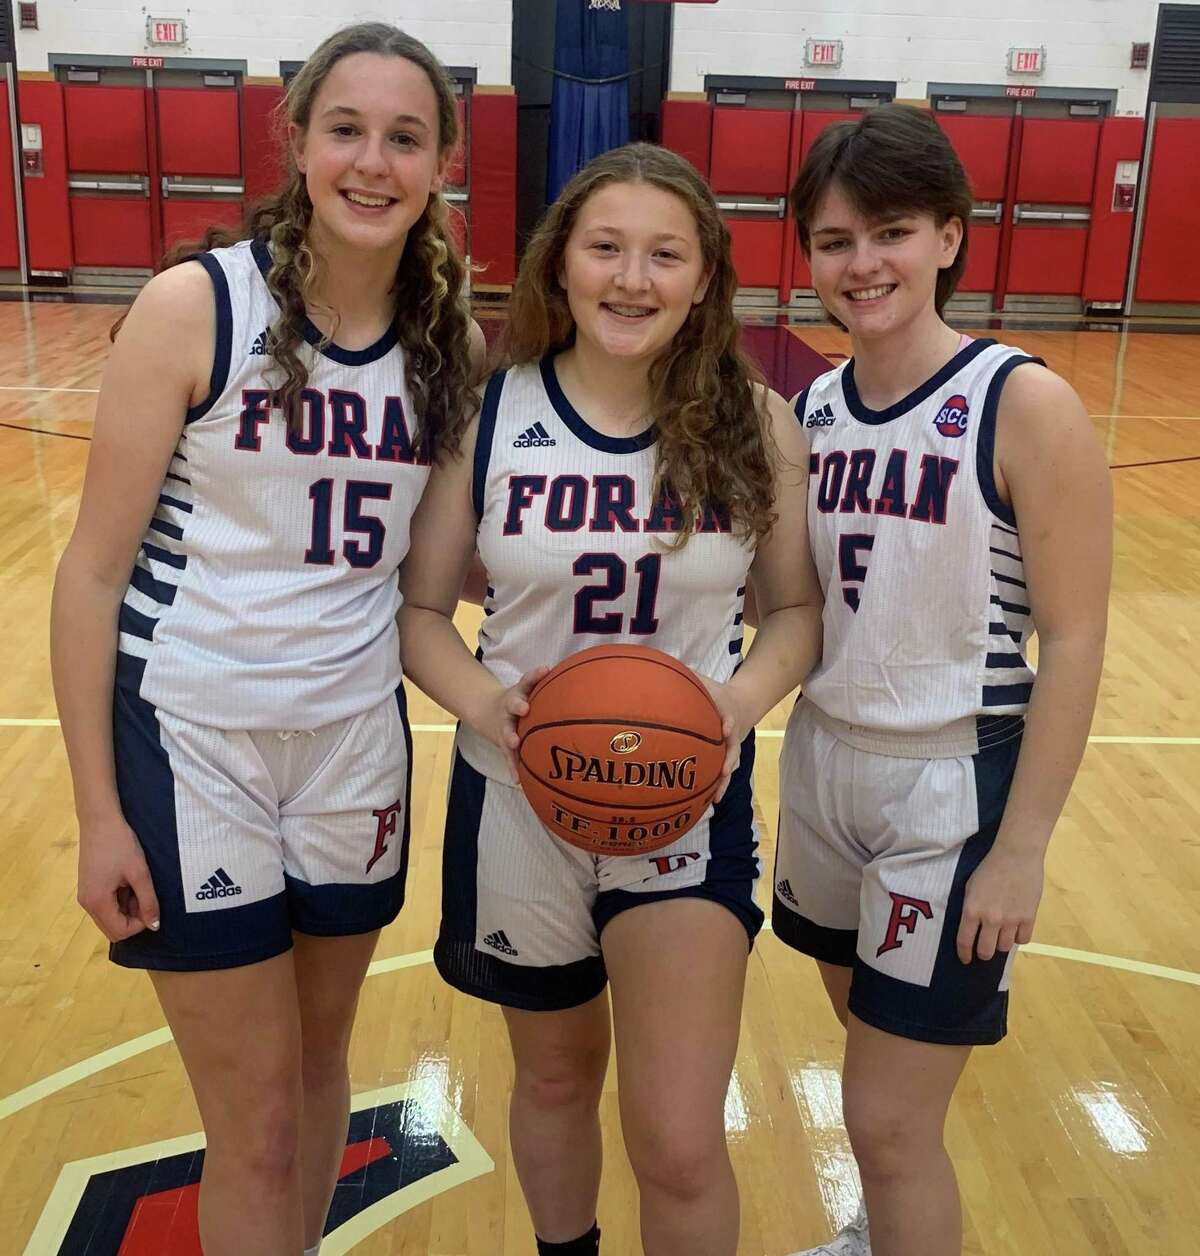 Courtney Musante, Mia Loewenberg and Abby Sanwald captain Foran's girls' basketball team.